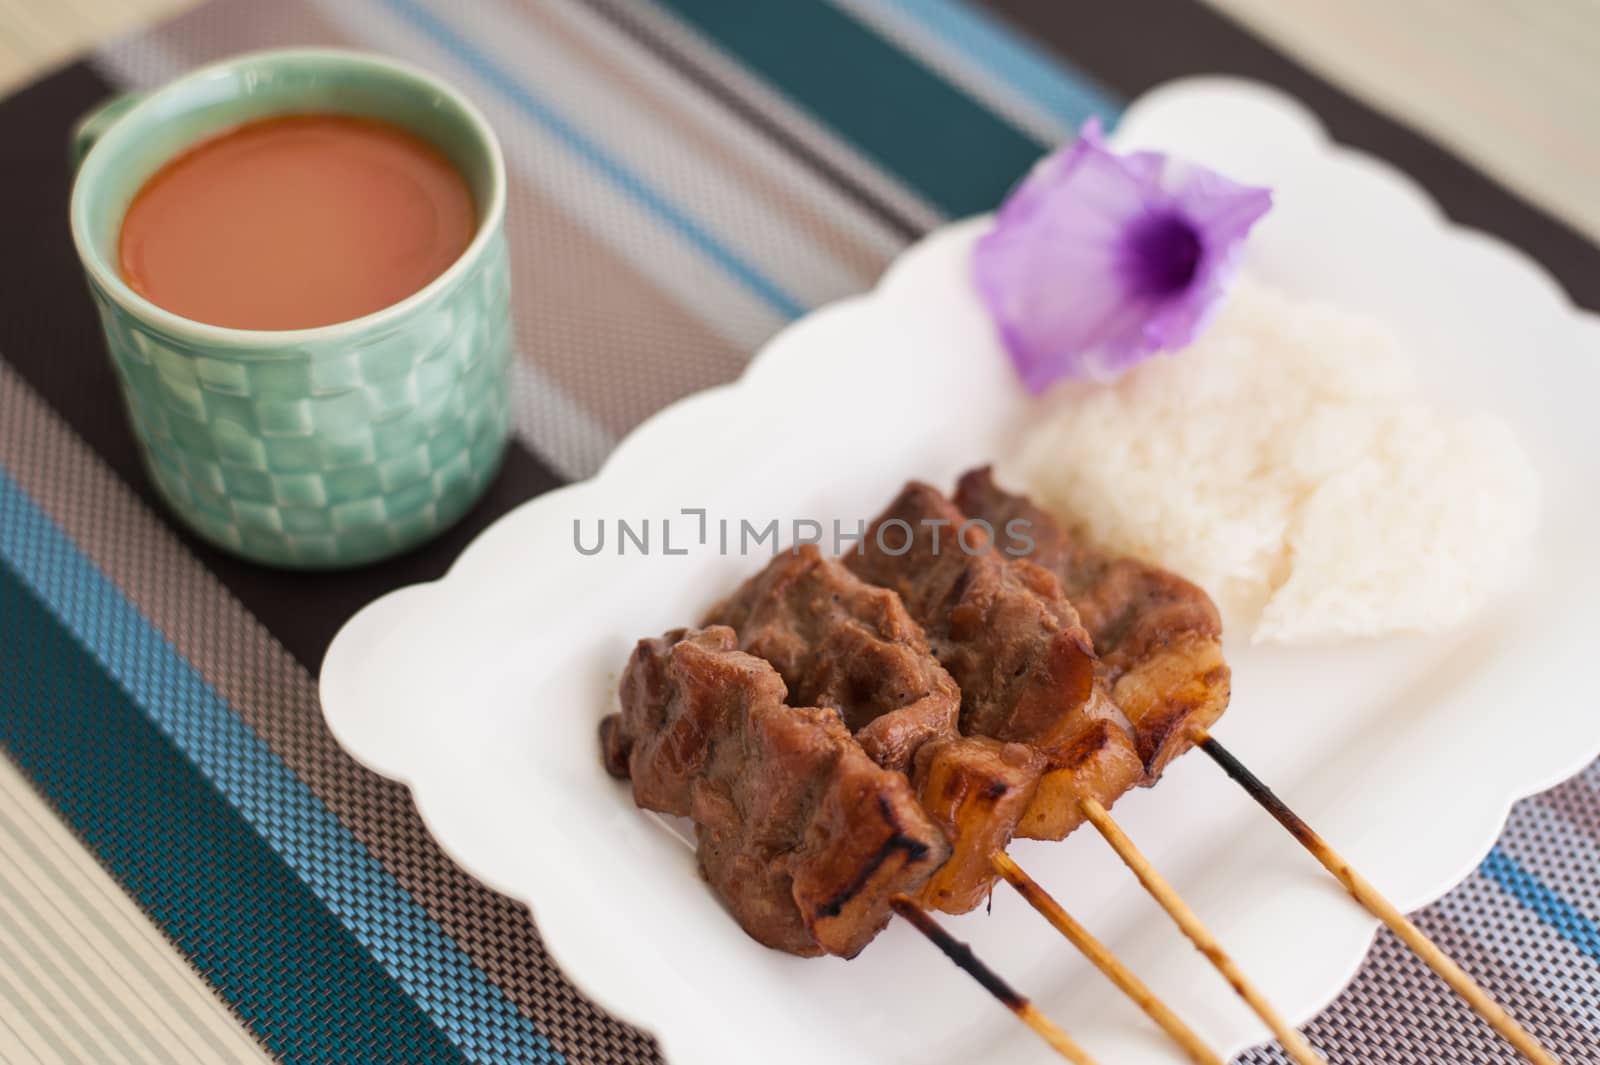 Grilled Pork, Pork Steak, Barbecue Pork With Rice And Hot Milk T by jimbophoto